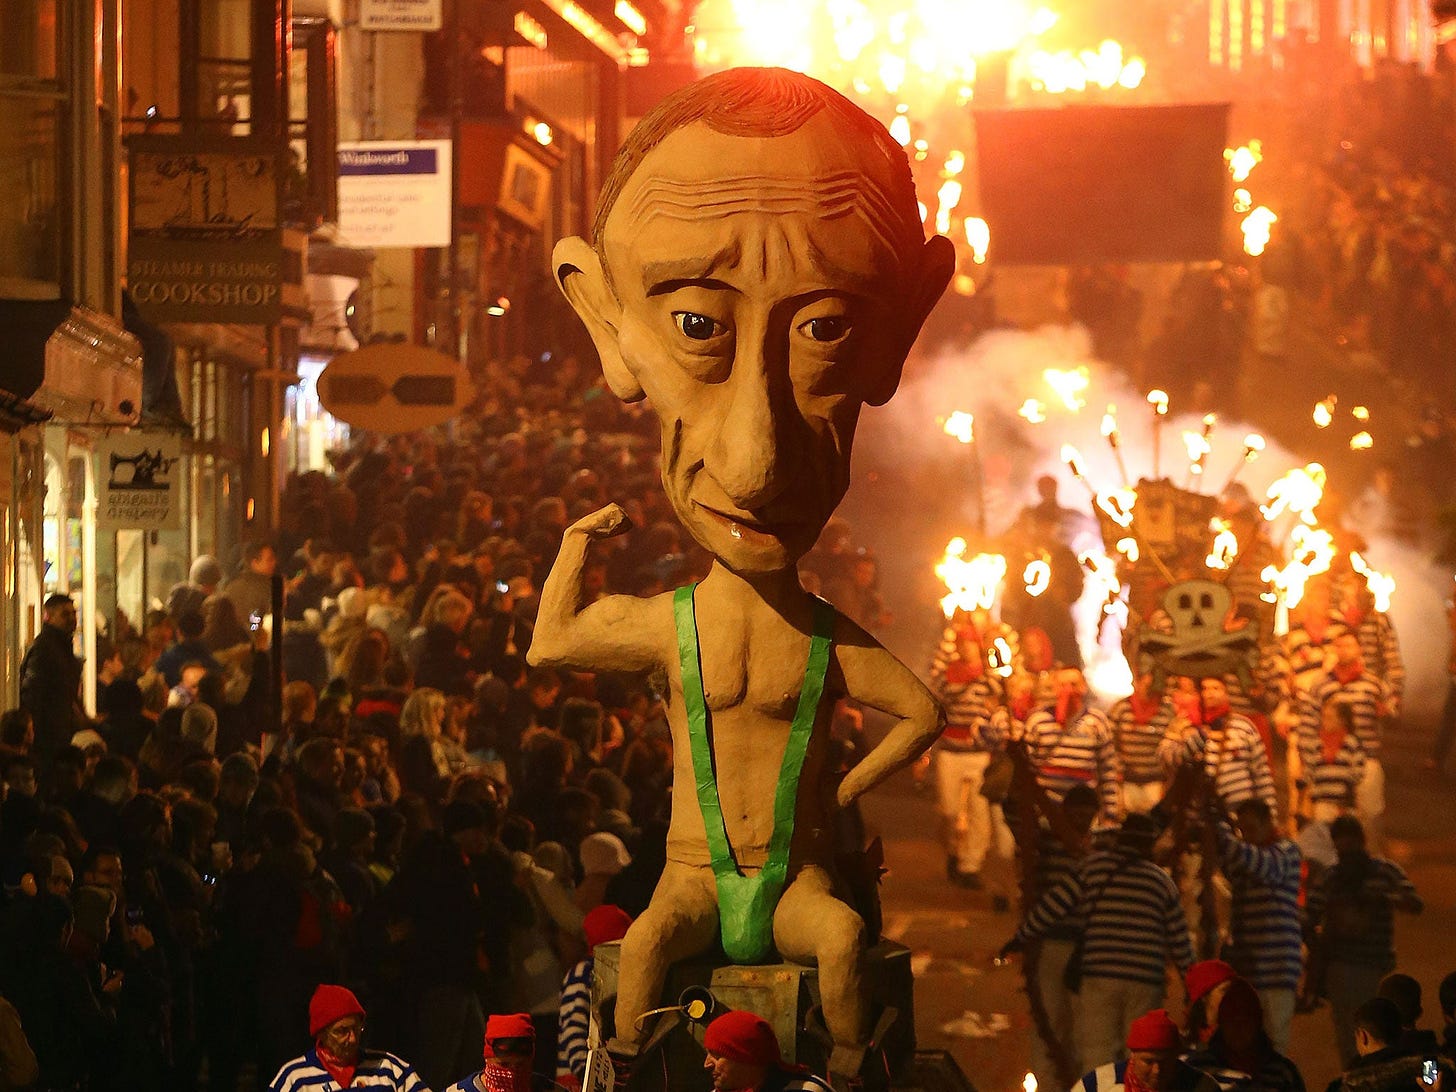 An effigy of Russian President Vladimir Putin is paraded through the town of Lewes in East Sussex where an annual bonfire night procession is held by the Lewes Bonfire Societies